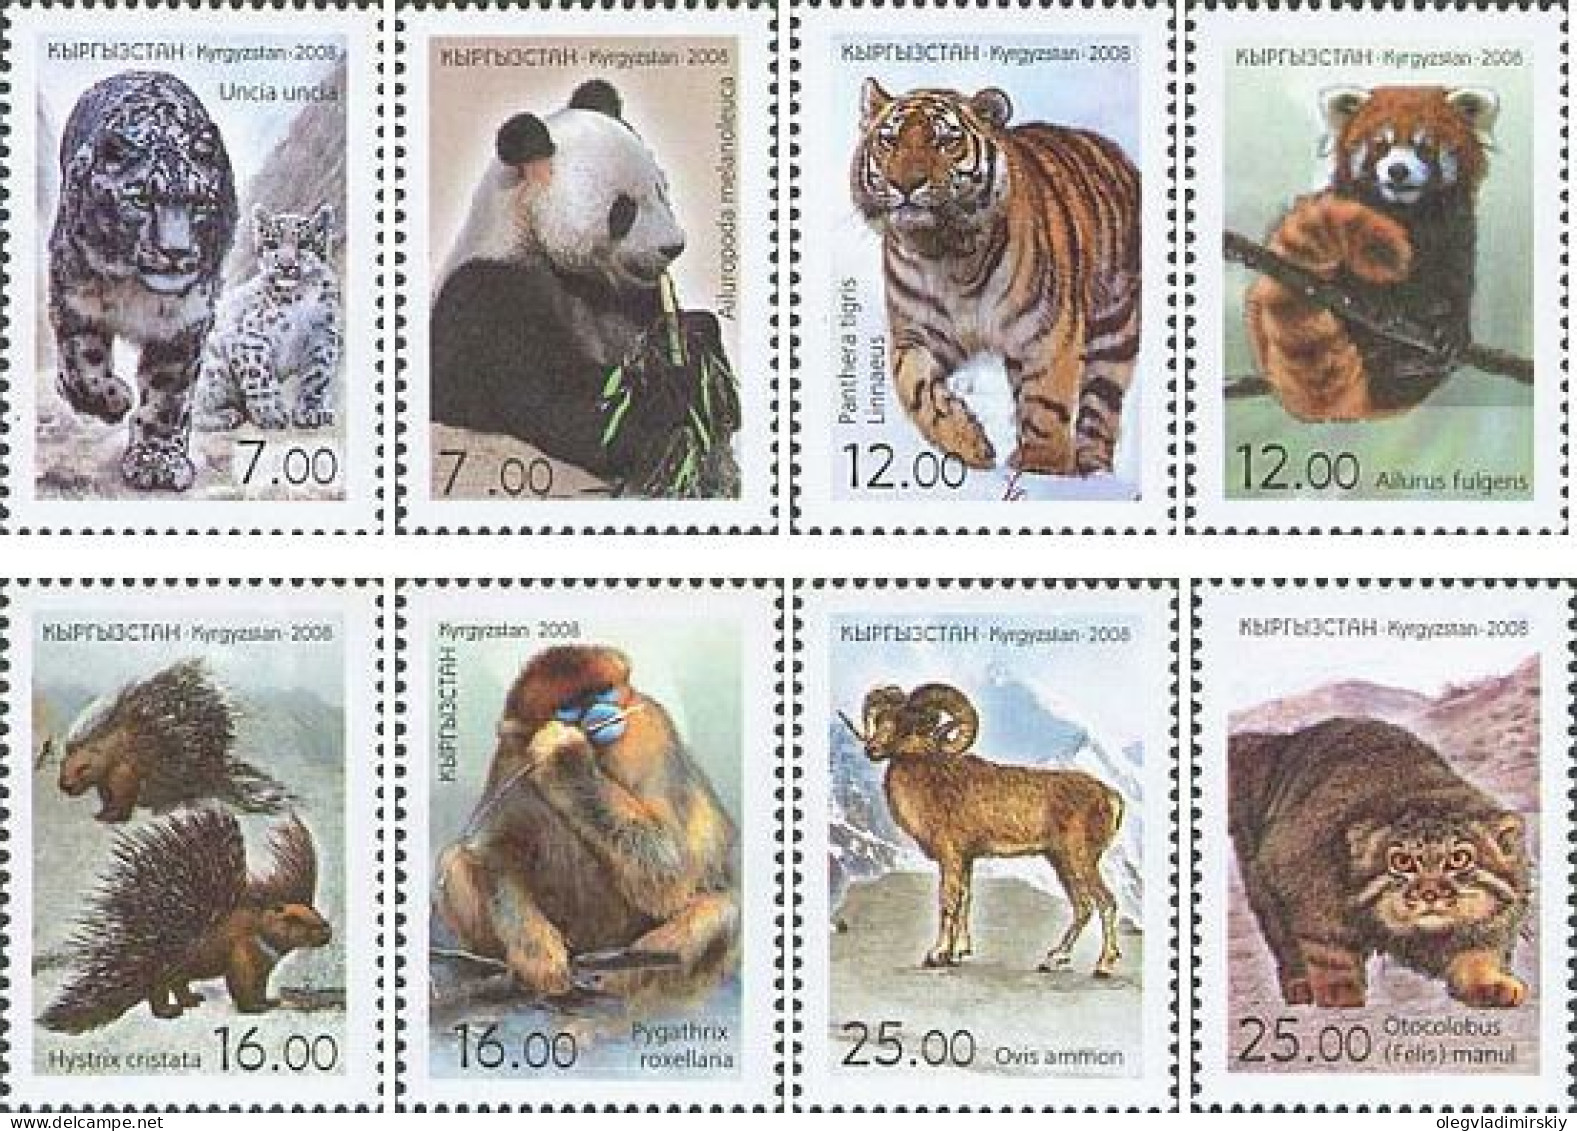 Kyrgyzstan 2008 Animals Of Asia From The Red Book Set Of 8 Perforated Stamps MNH - Kirghizstan